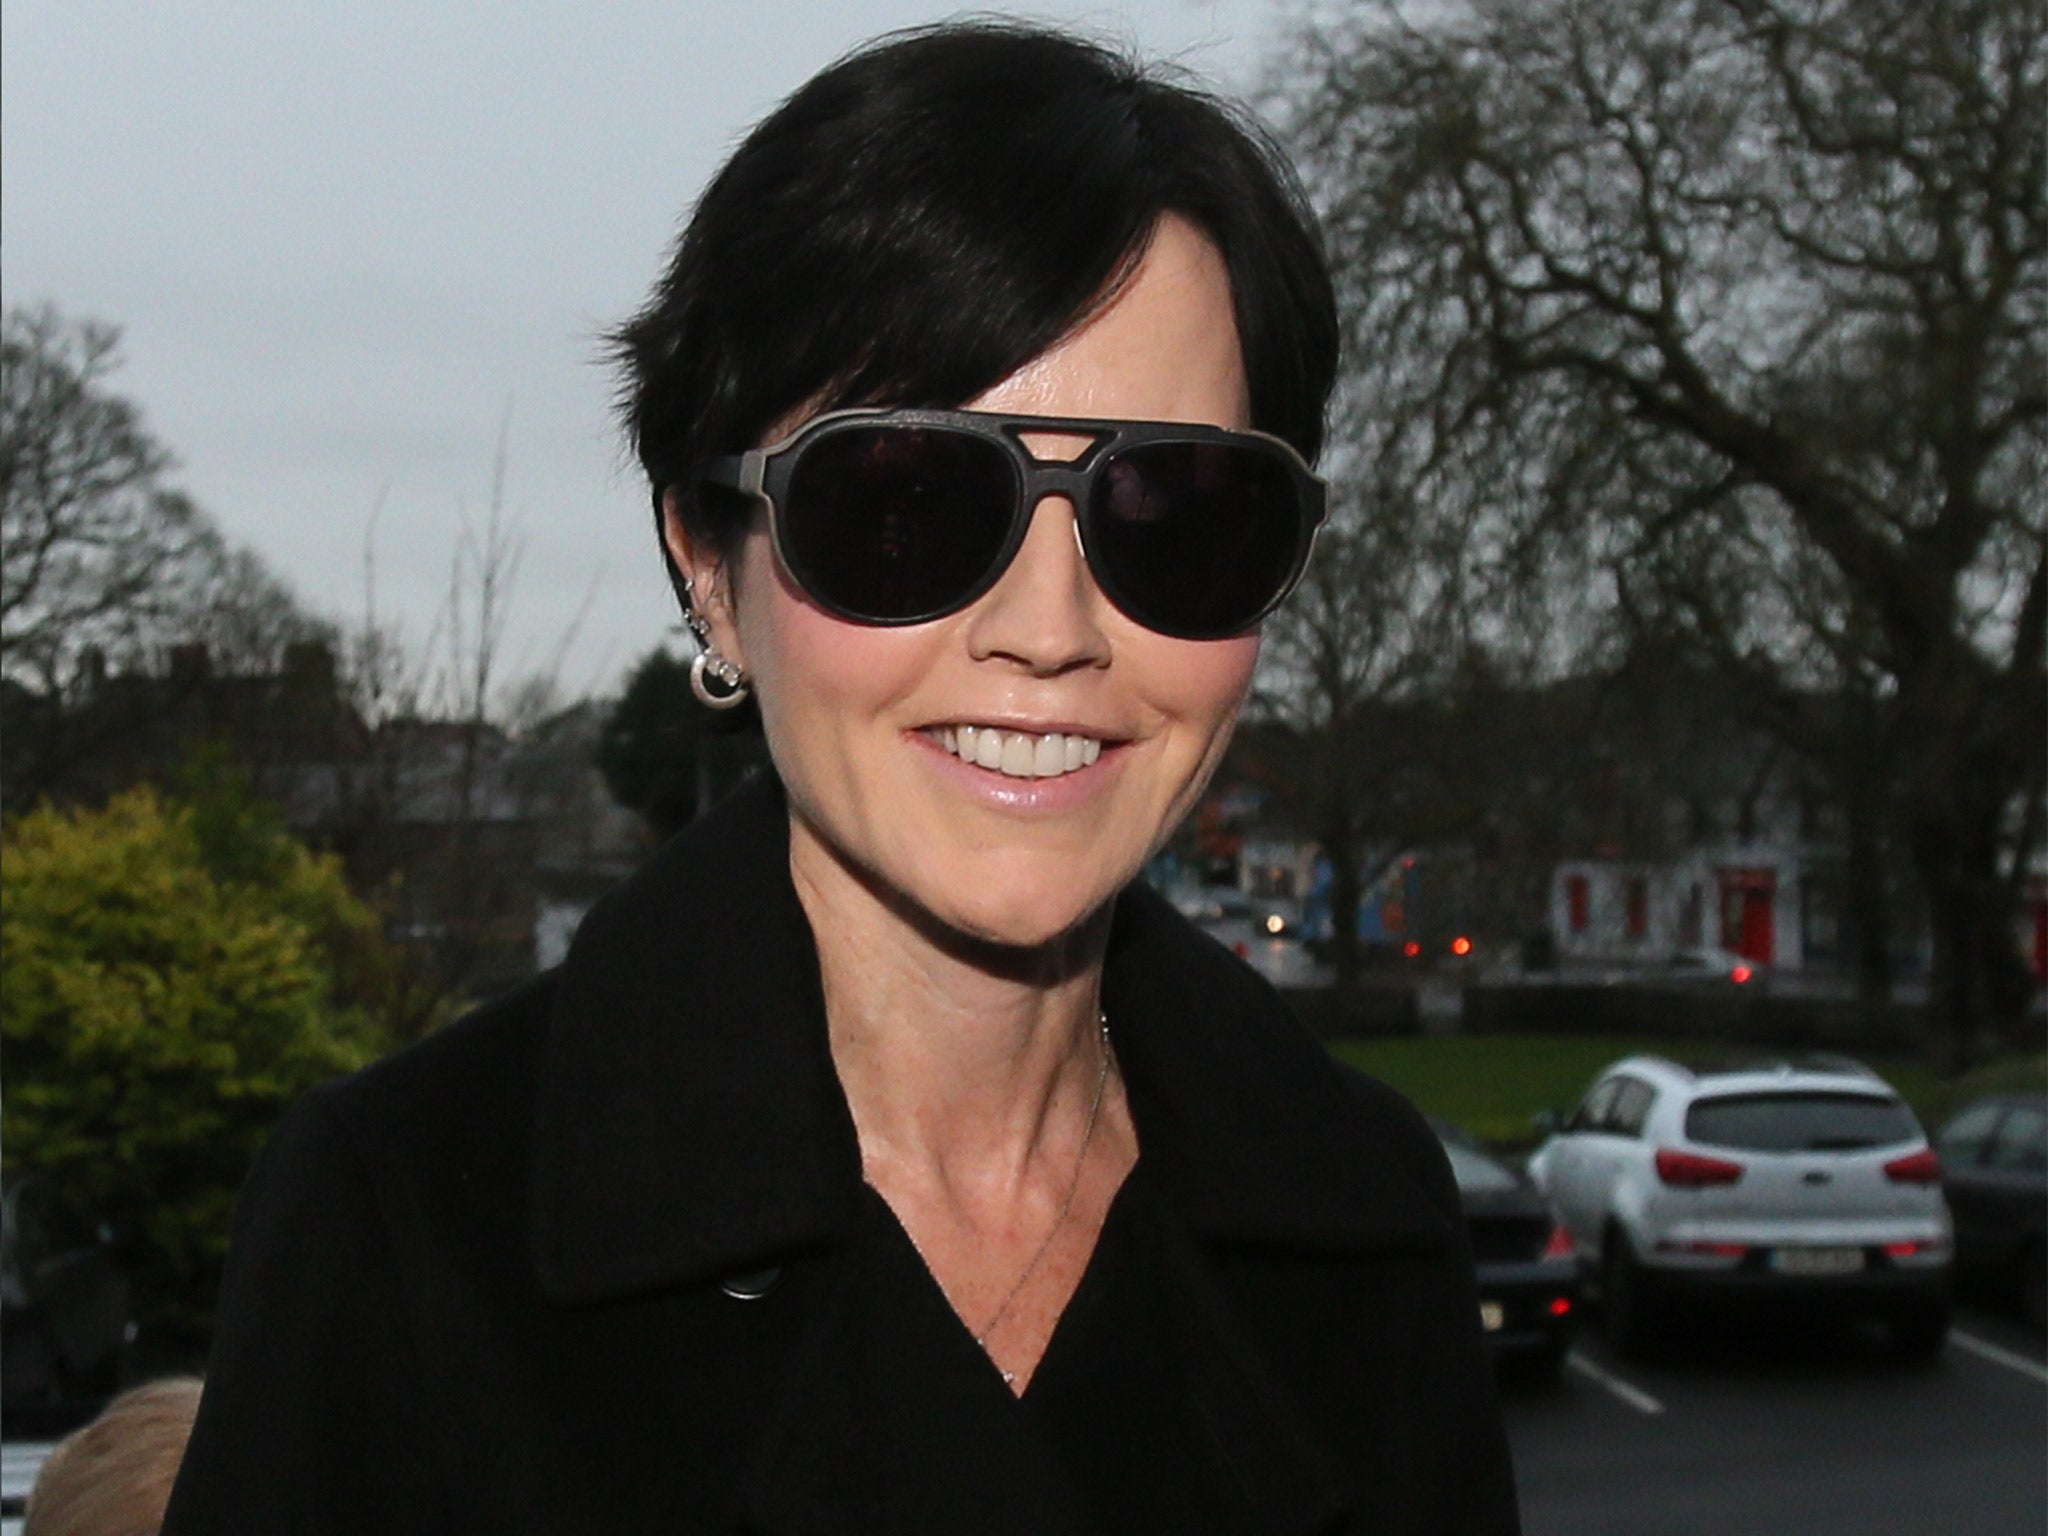 Cranberries singer Dolores O'Riordan outside Ennis District Court, where she was charged over an incident on a flight from New York